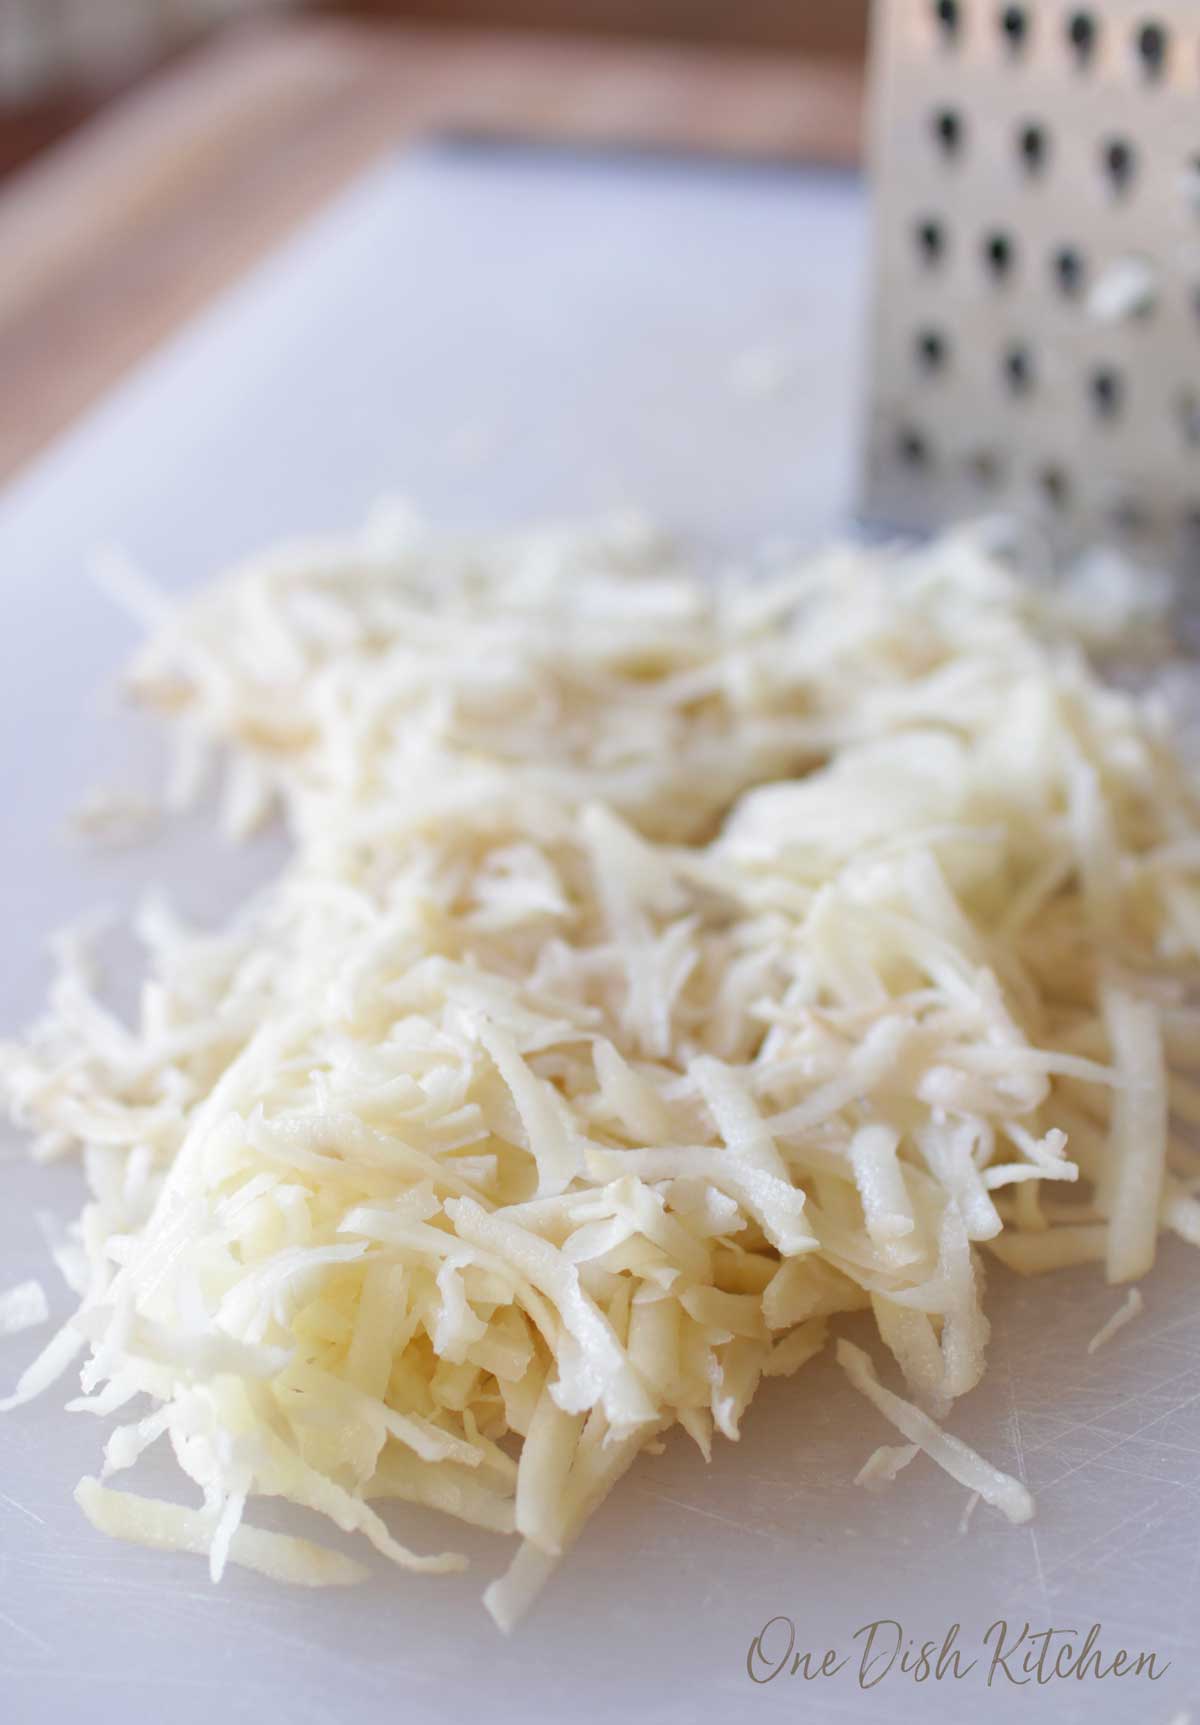 Shredded potatoes next to a cheese grater.